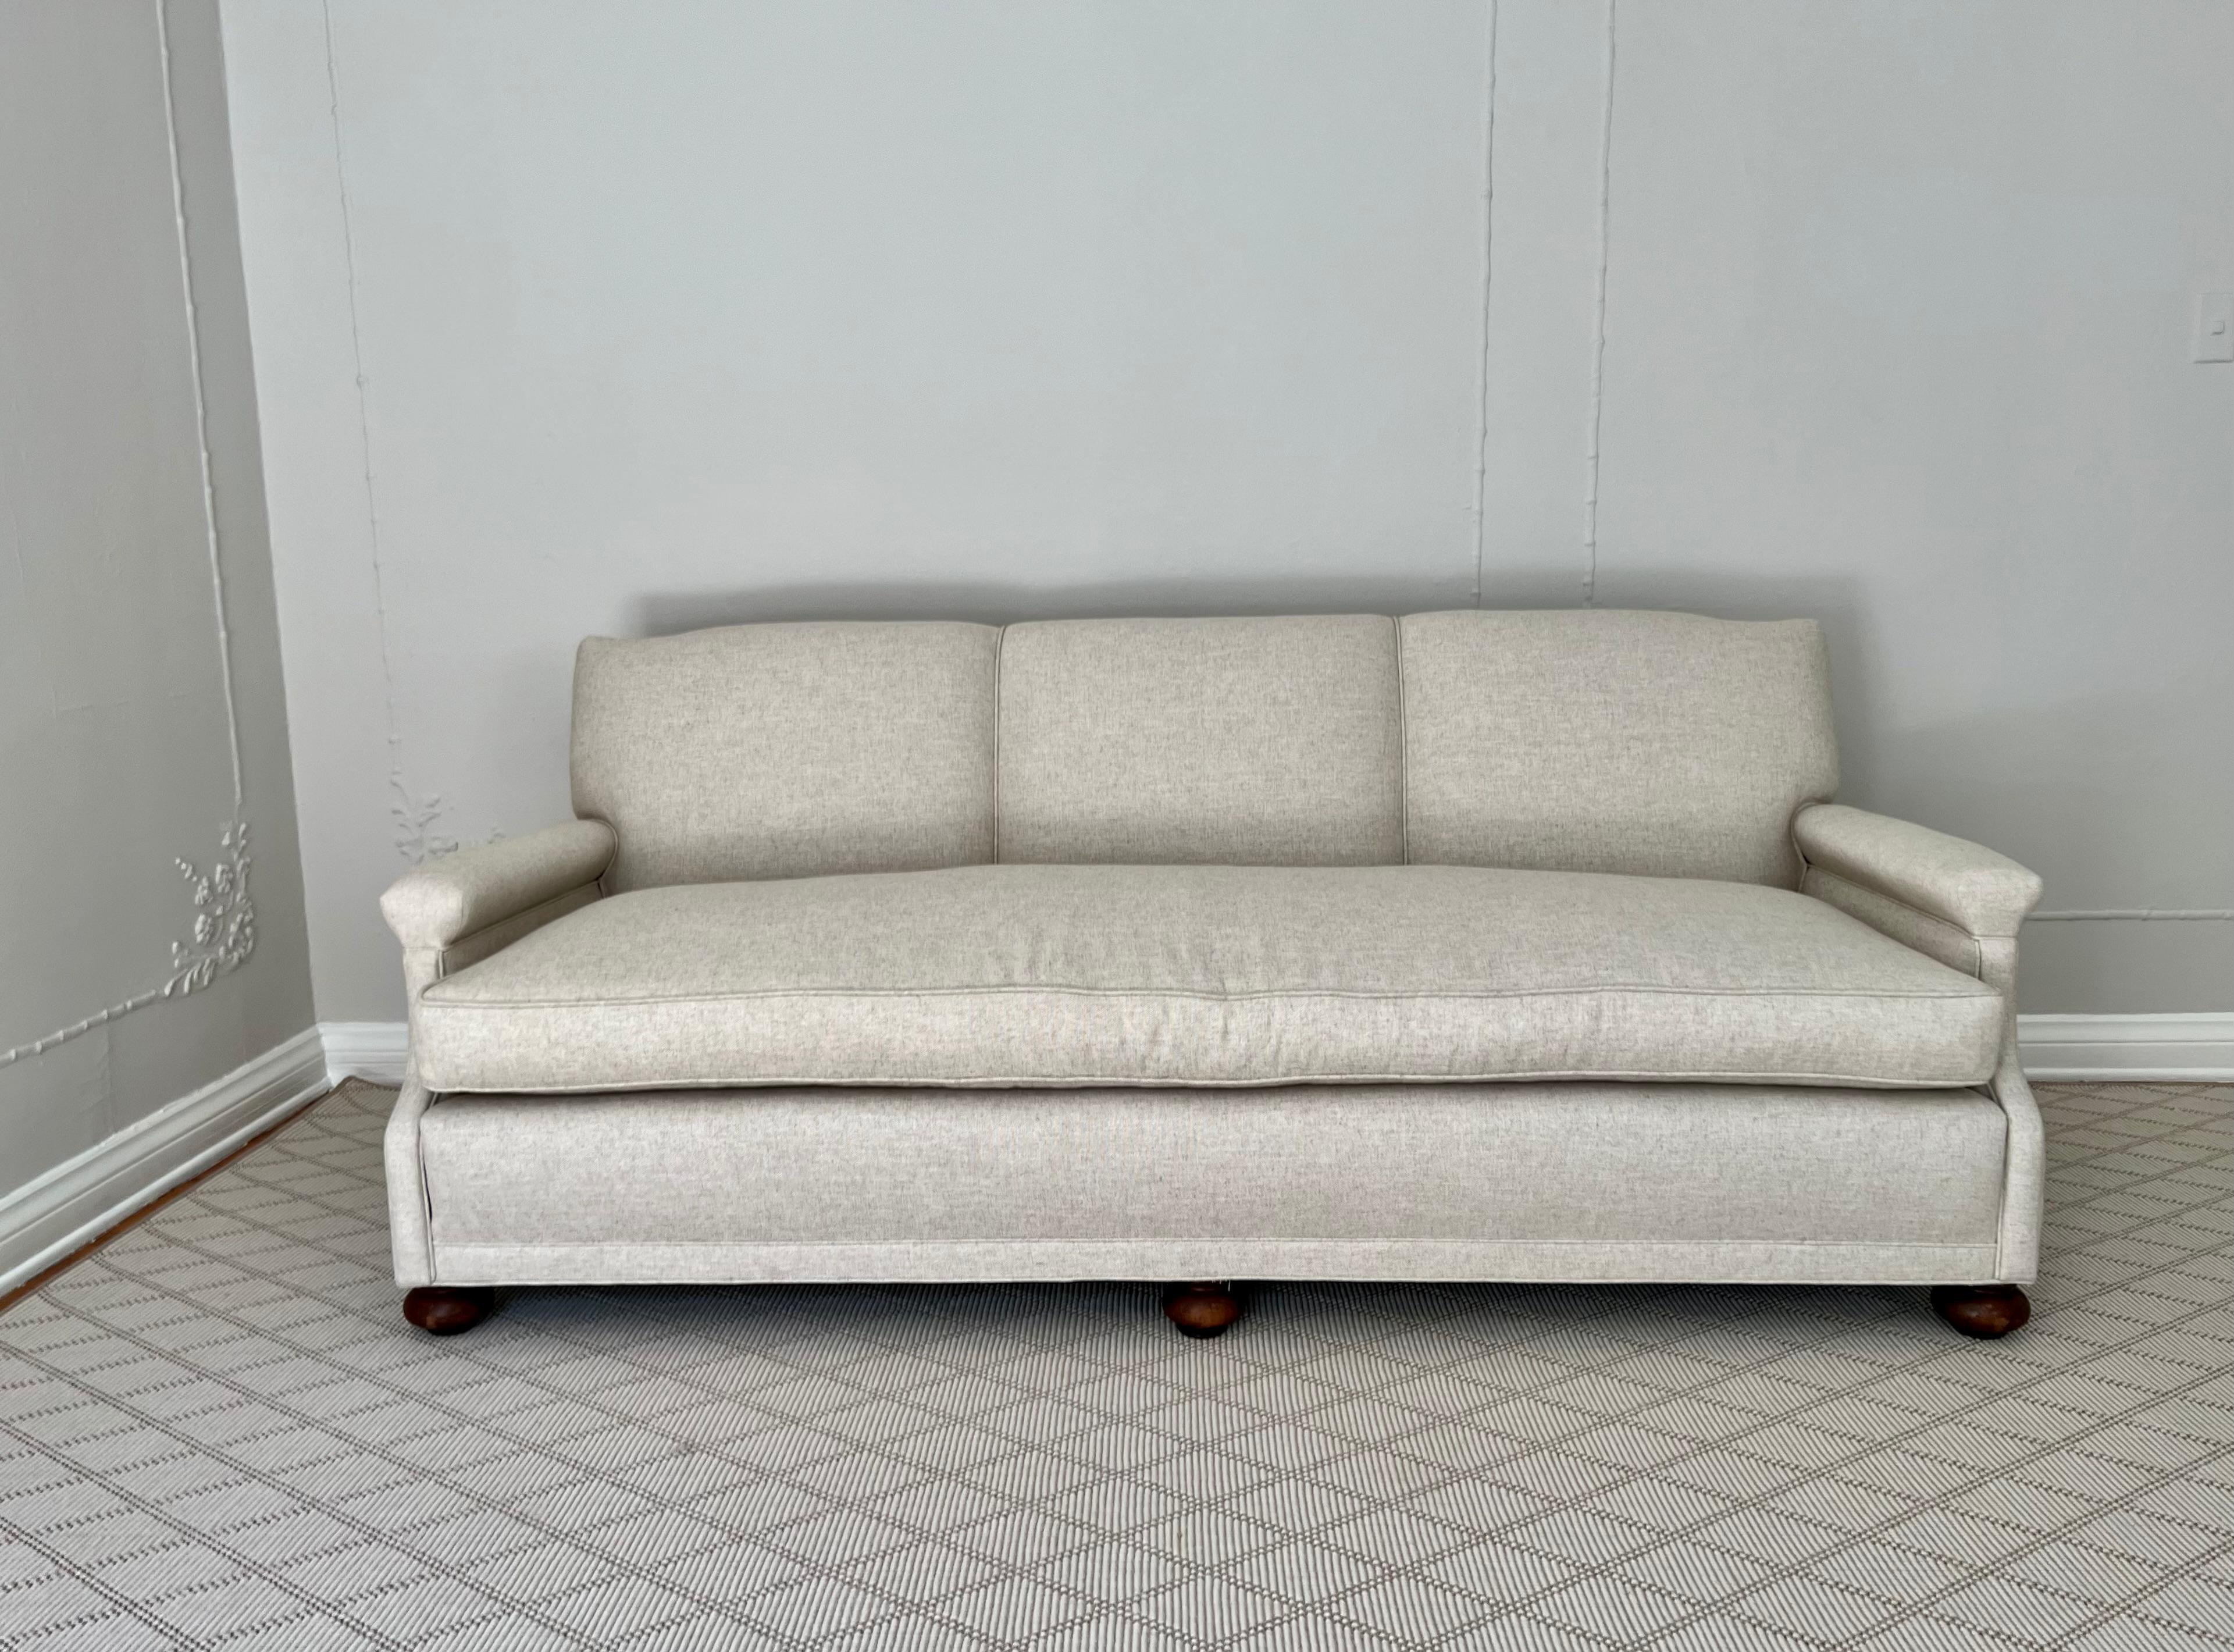 20th Century Sofa in Linen and Down Upholstery and Bun Feet For Sale